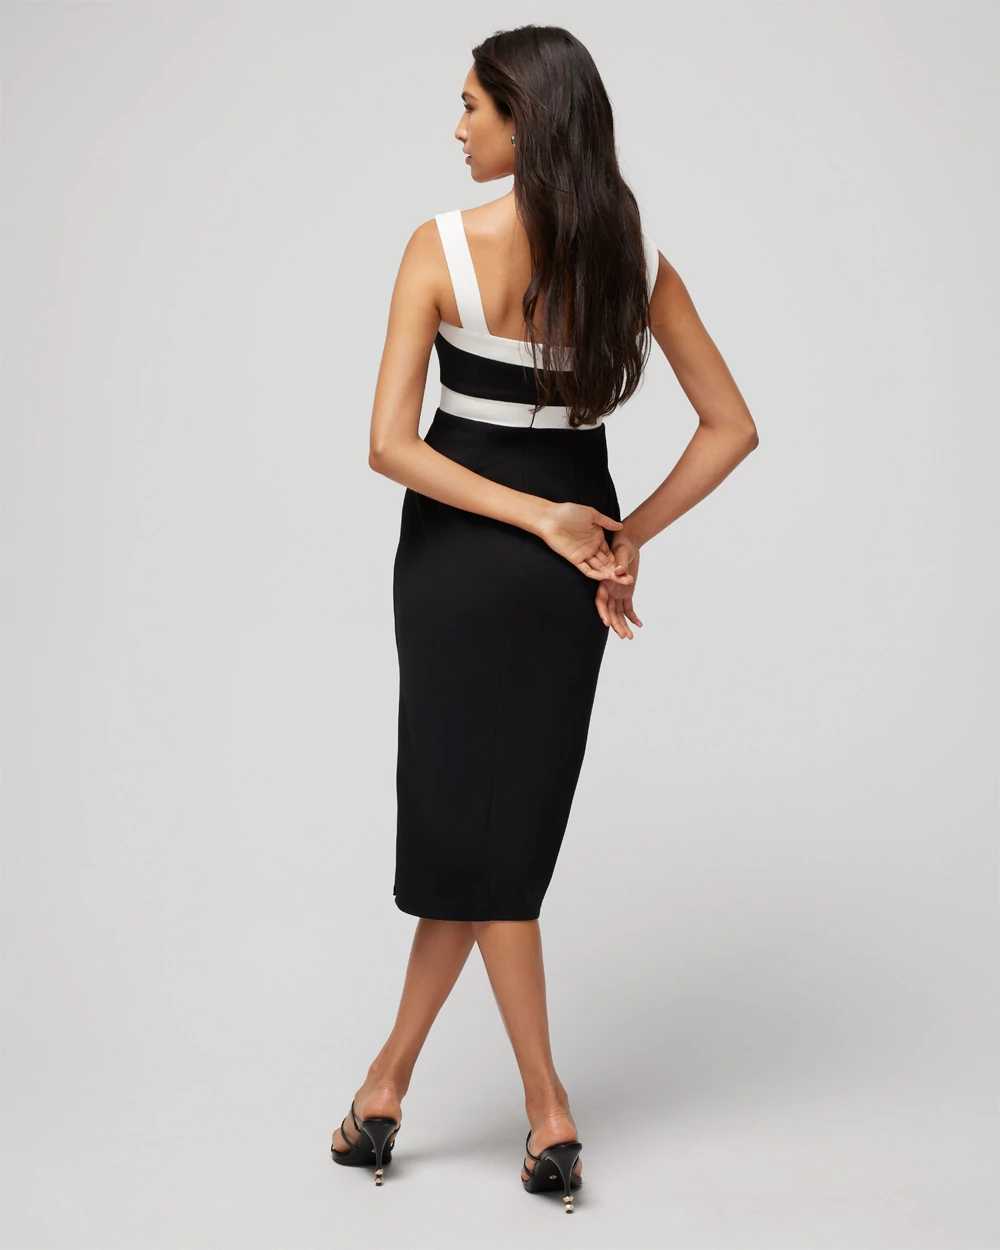 Sleeveless Square Neck Contrast Midi Dress click to view larger image.